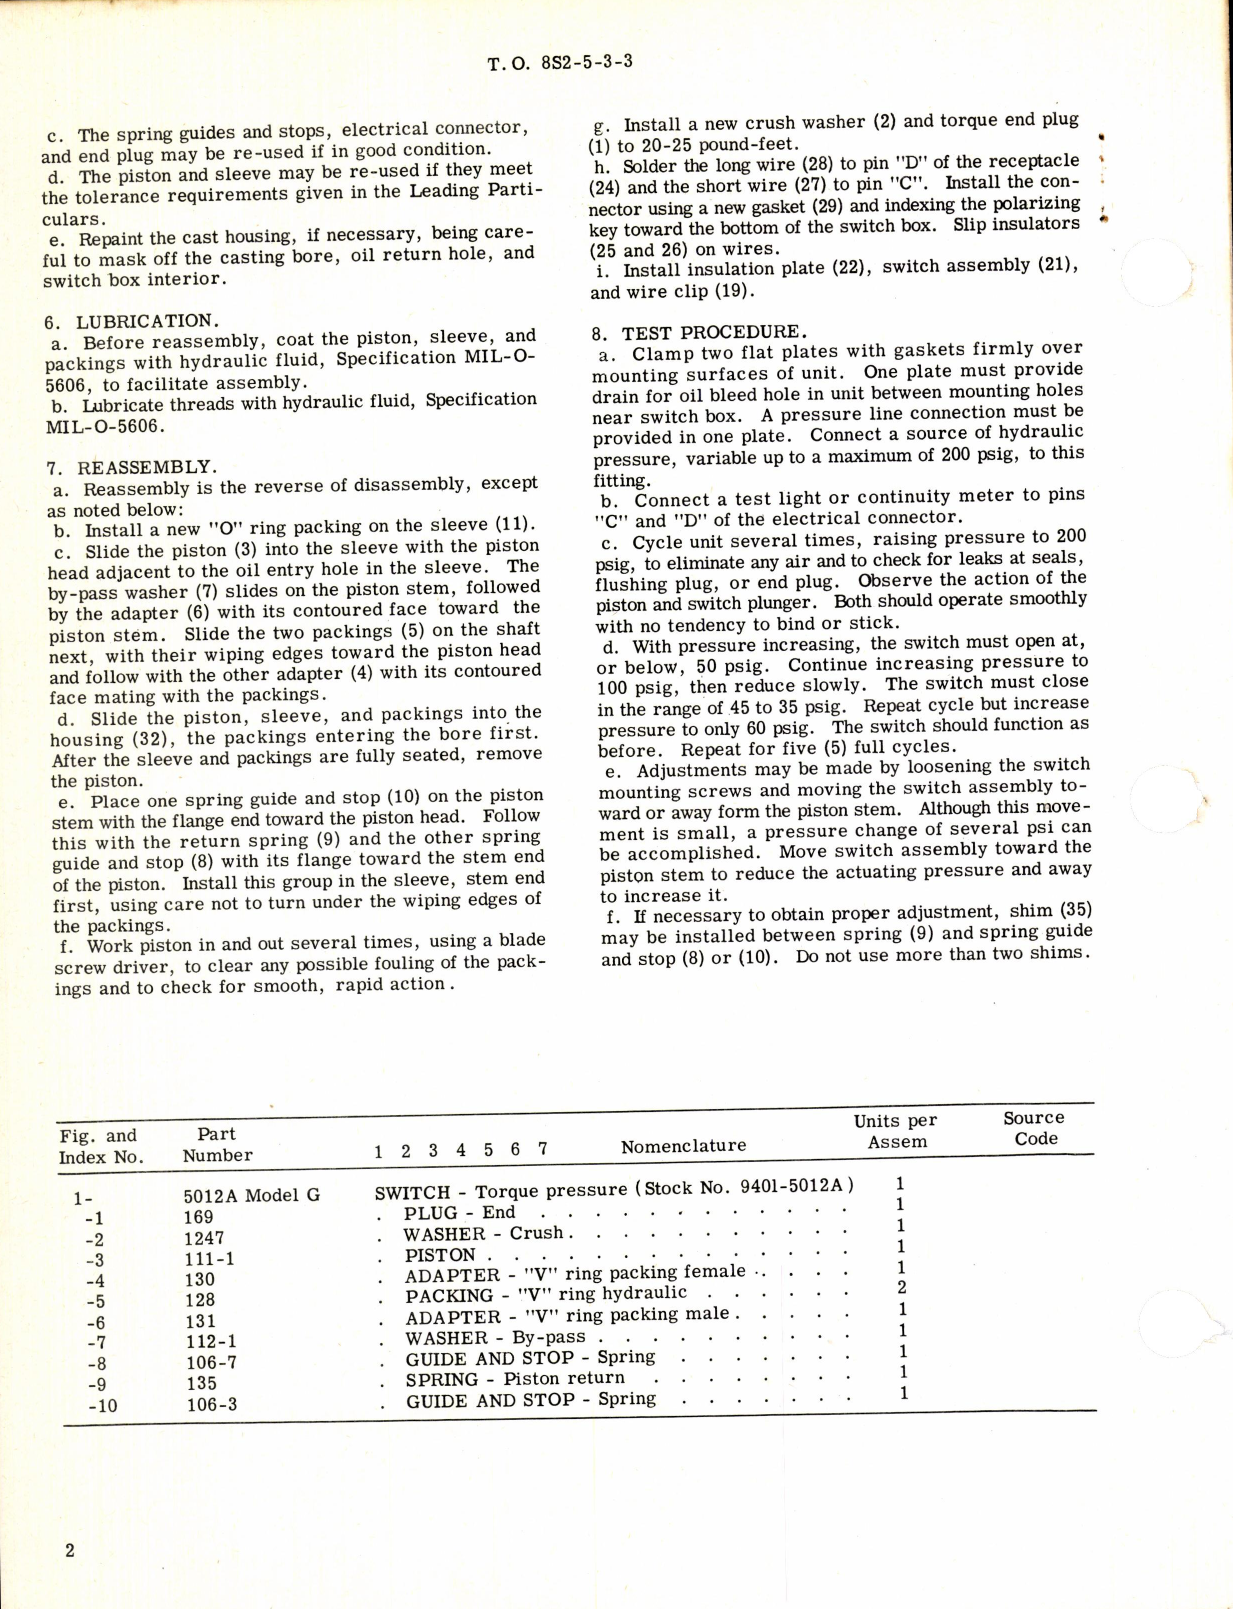 Sample page 2 from AirCorps Library document: Torque Pressure Switch 5012A Model G, Stock No. 9401-5012A